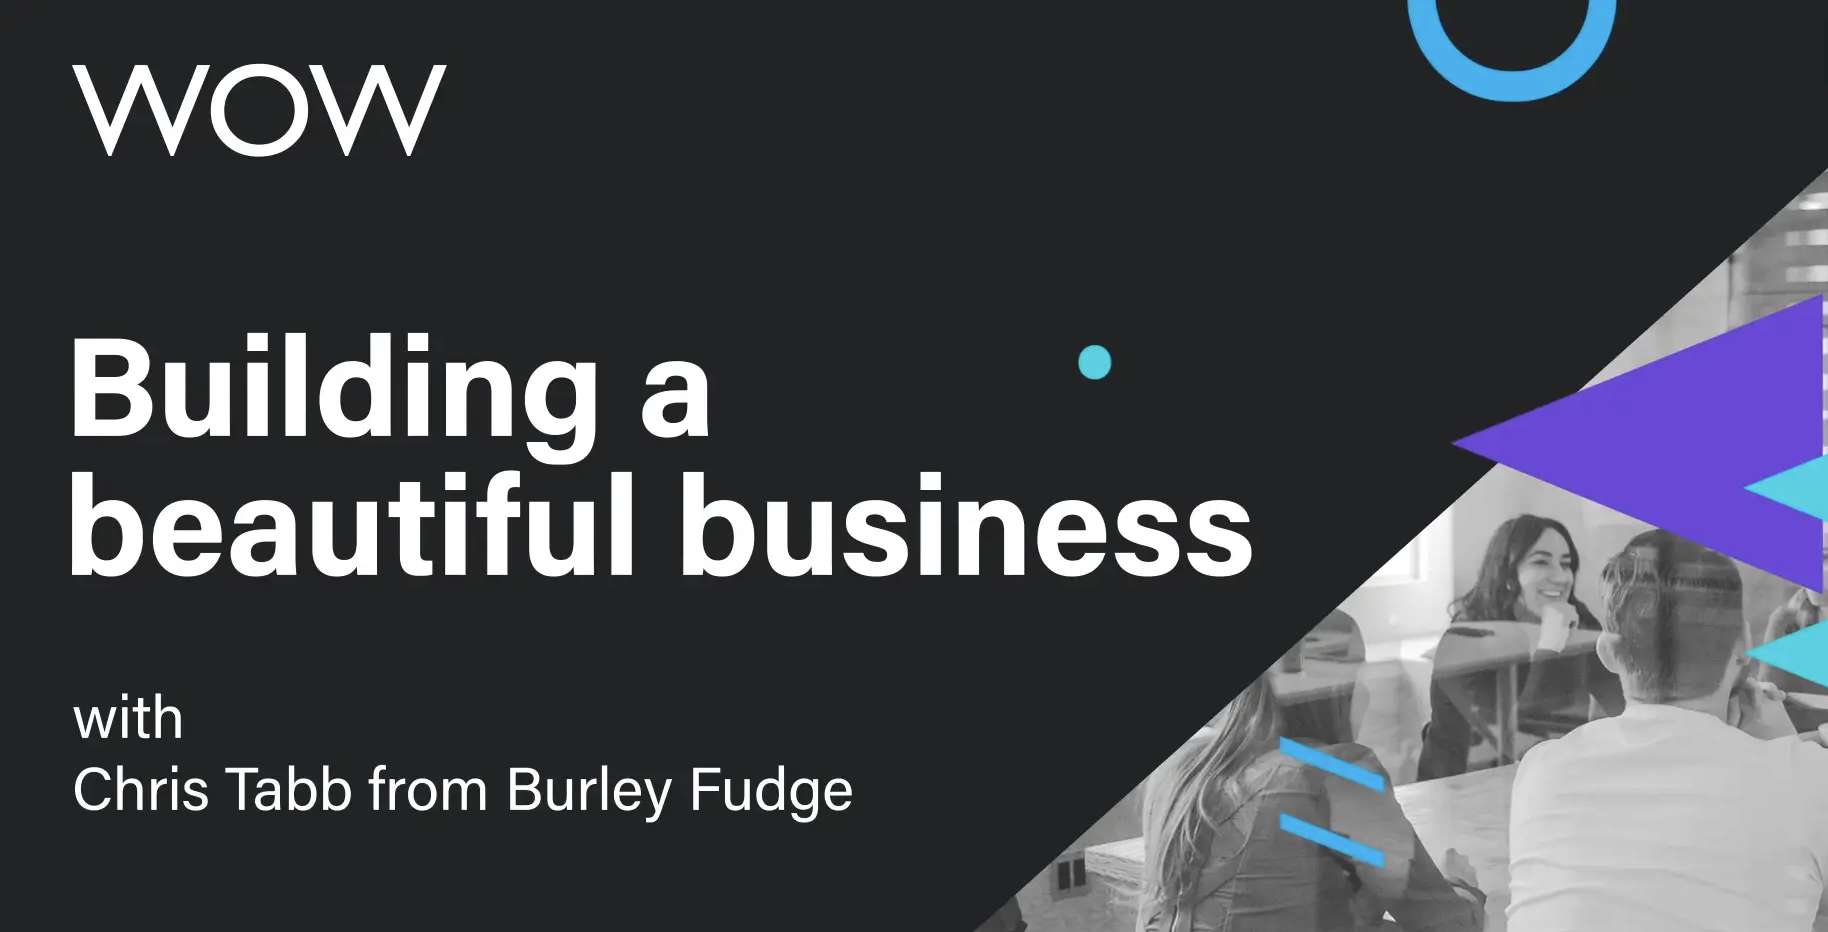 Chris Tabb from Burley Fudge on The Wow Company's webinar about Building a beautiful business